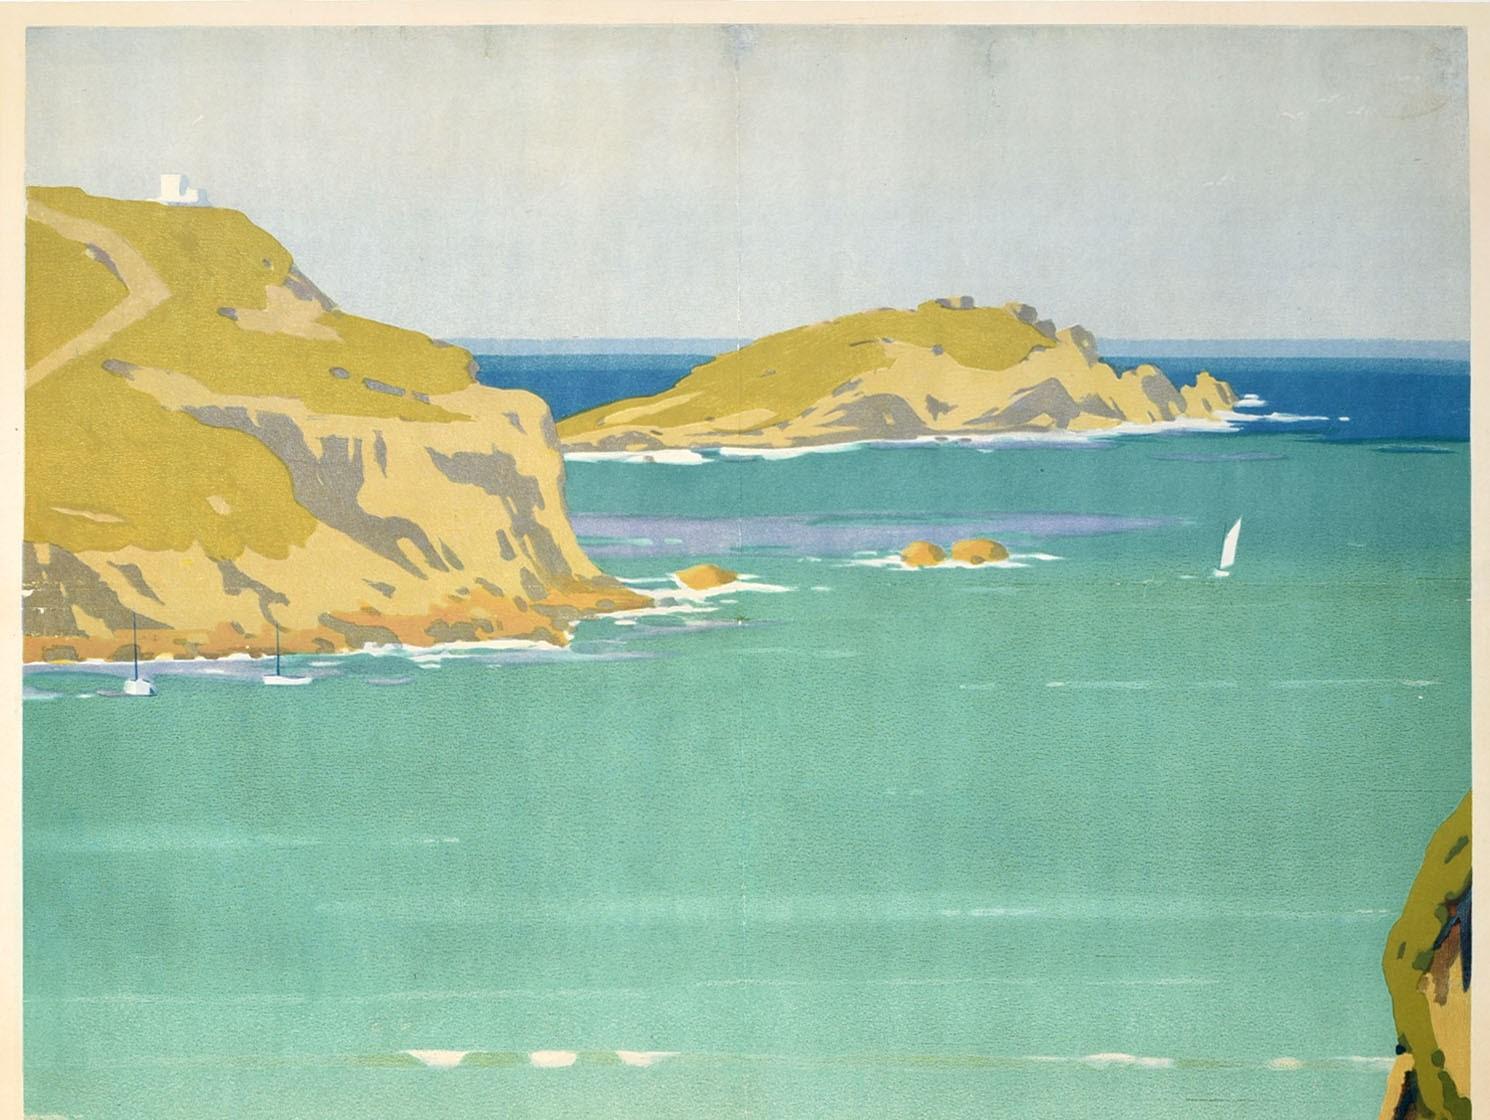 Original vintage train travel poster for Newquay On The Cornish Coast issued by GWR Great Western Railway featuring a scenic view of people enjoy their holiday on the sandy beach and swimming in the waves with a sailing boat at sea and surfers